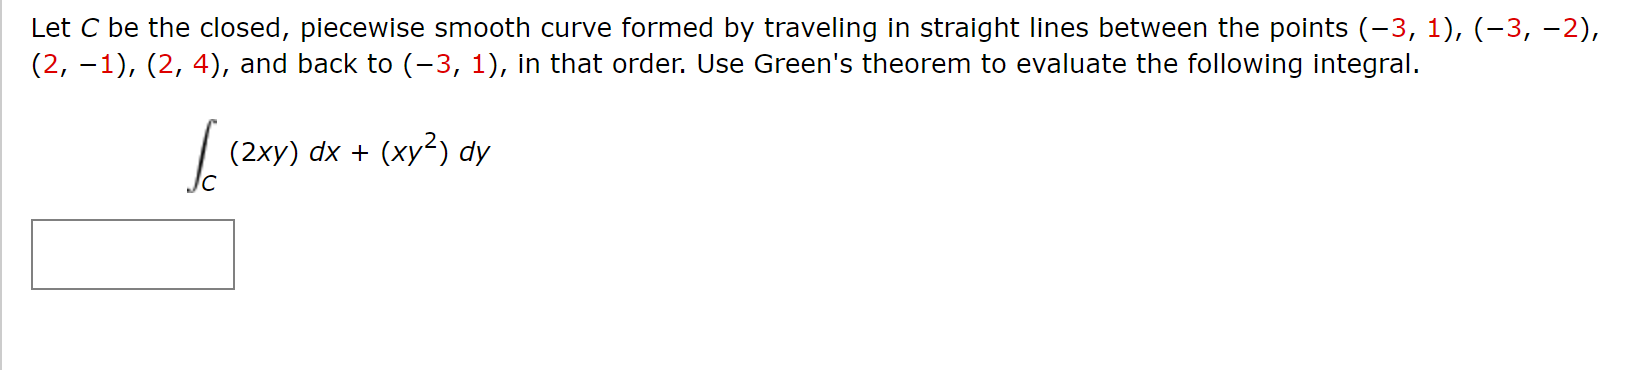 Let C be the closed, piecewise smooth curve formed by traveling in straight lines between the points (-3, 1), (-3, -2),
(2, –1), (2, 4), and back to (-3, 1), in that order. Use Green's theorem to evaluate the following integral.
(2xy) dx + (xy²) dy
